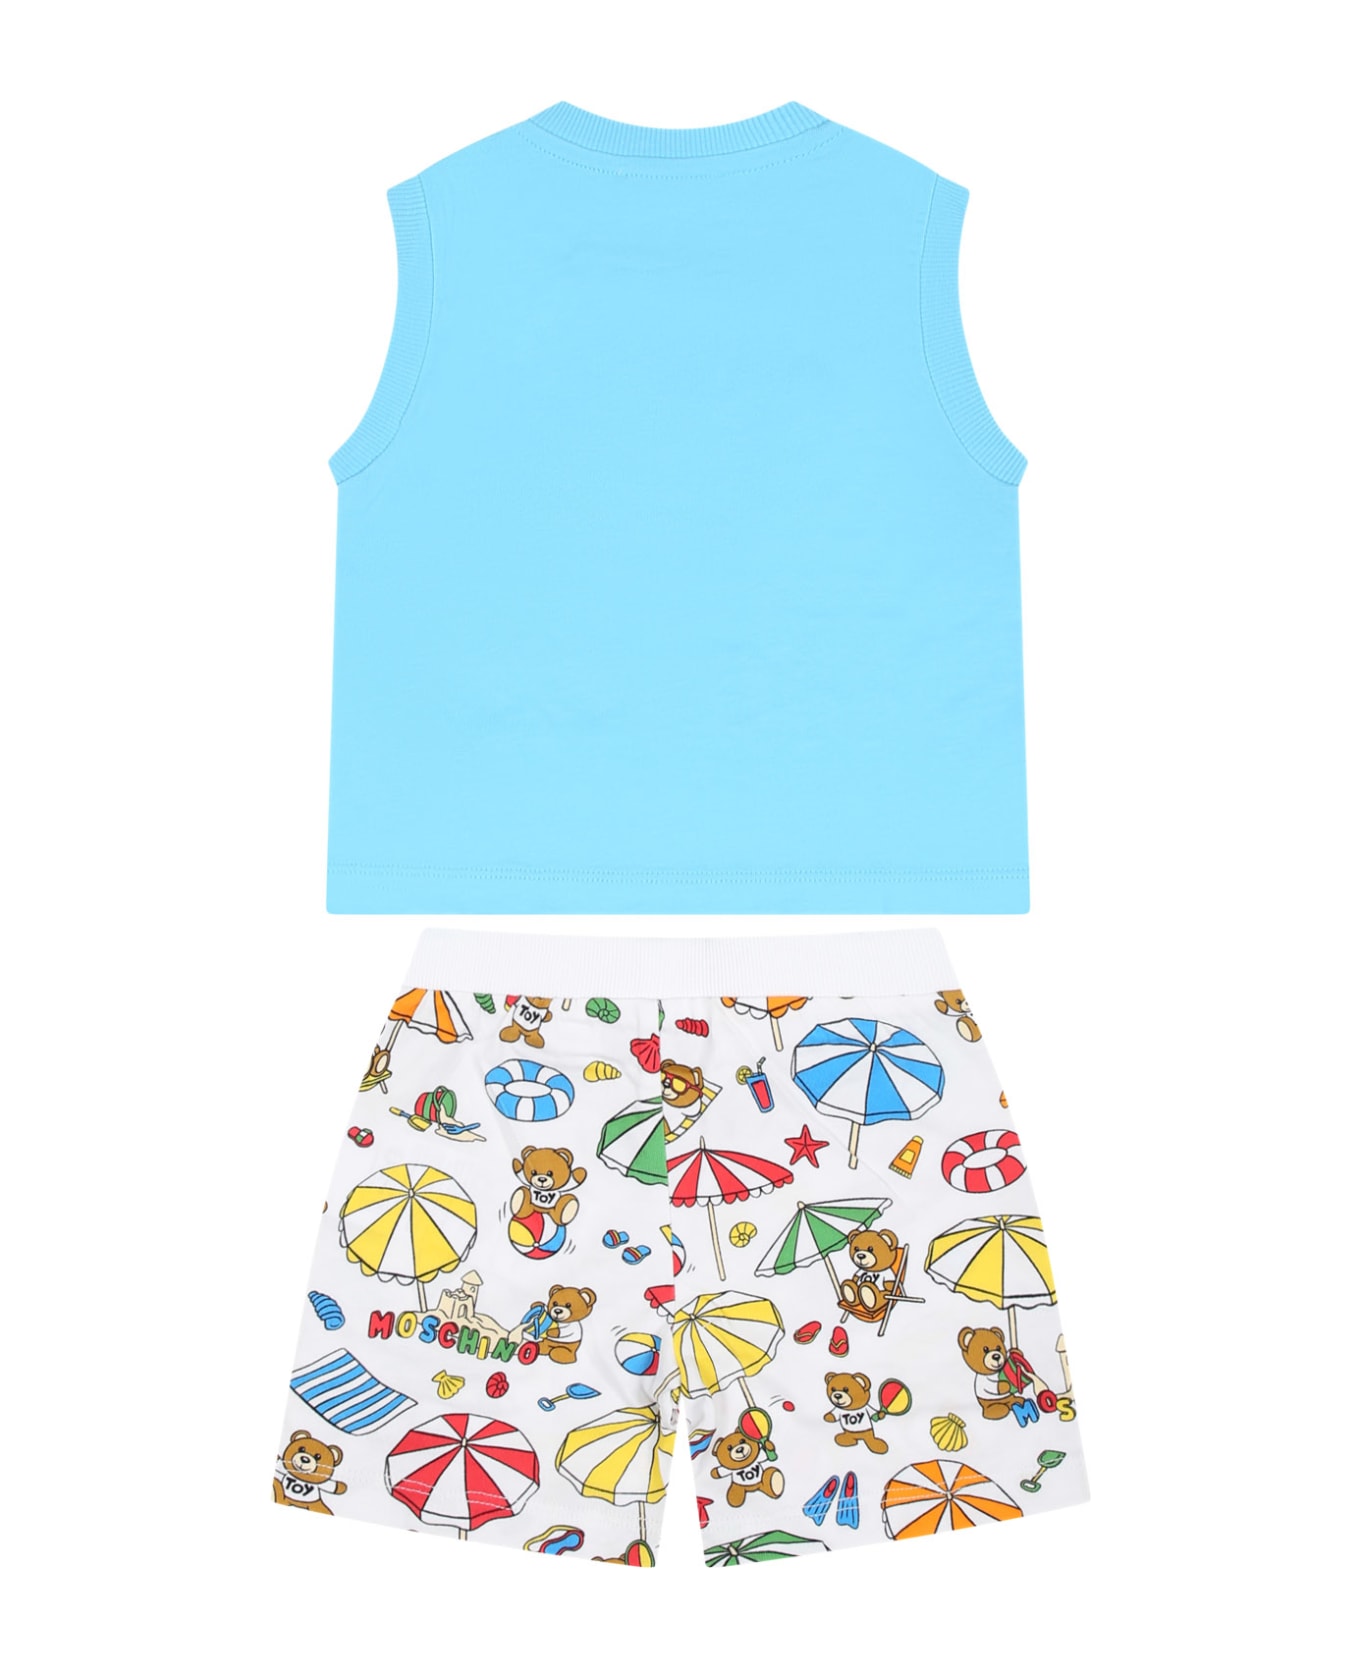 Moschino Sky Blue Sports Suit For Baby Boy With Teddy Bear - Light Blue ボトムス